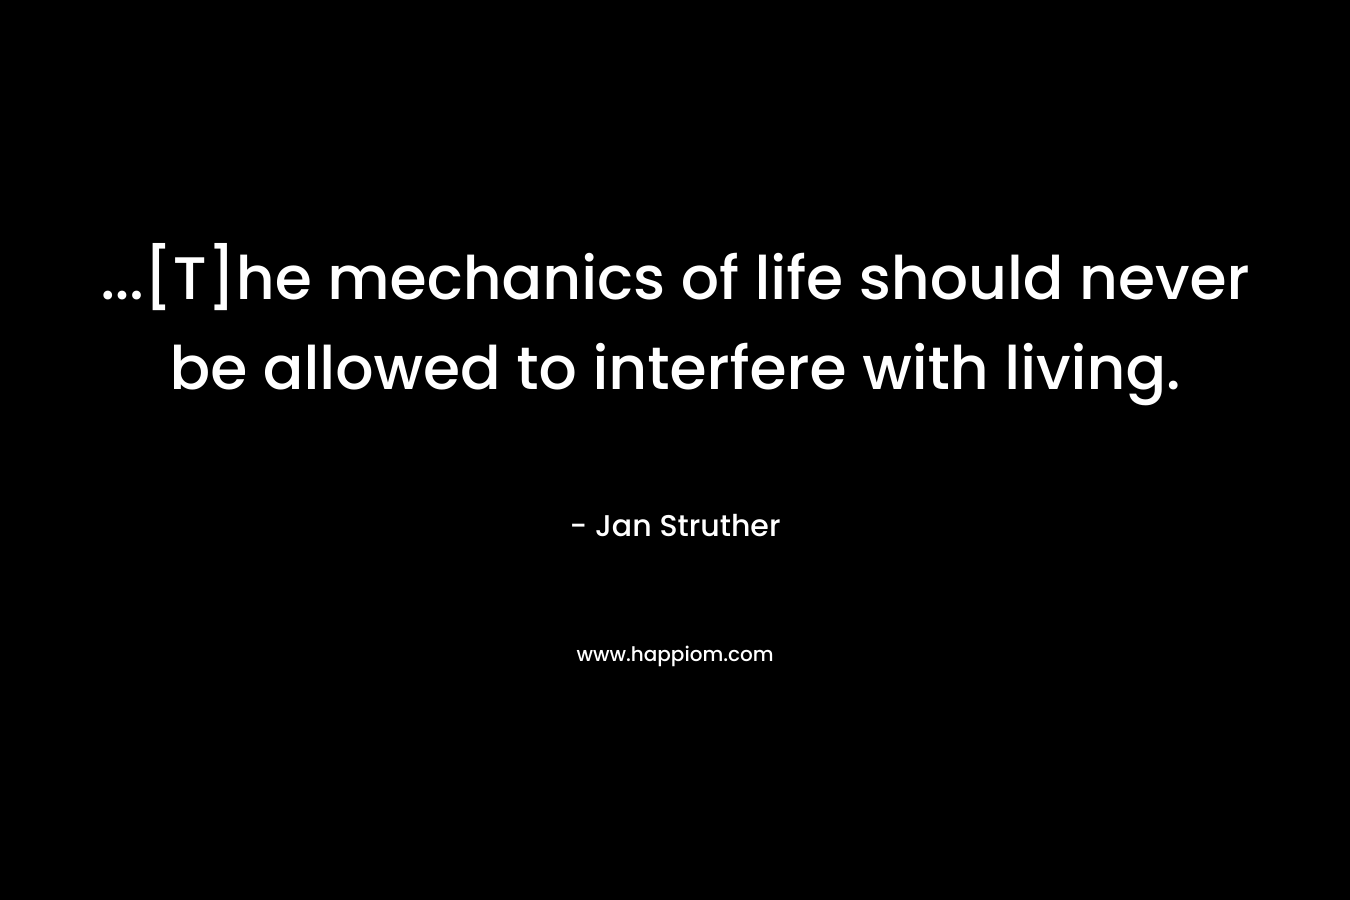 ...[T]he mechanics of life should never be allowed to interfere with living.